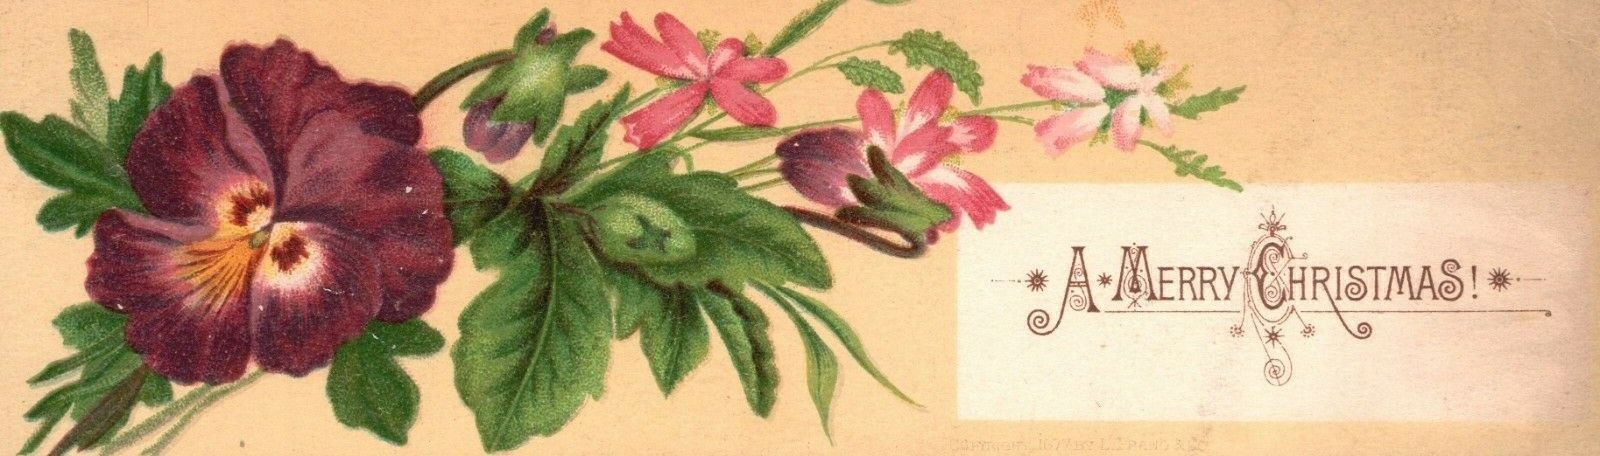 1880s-90s Purple & Pink Blooming Flowers A Merry Christmas Trade Card